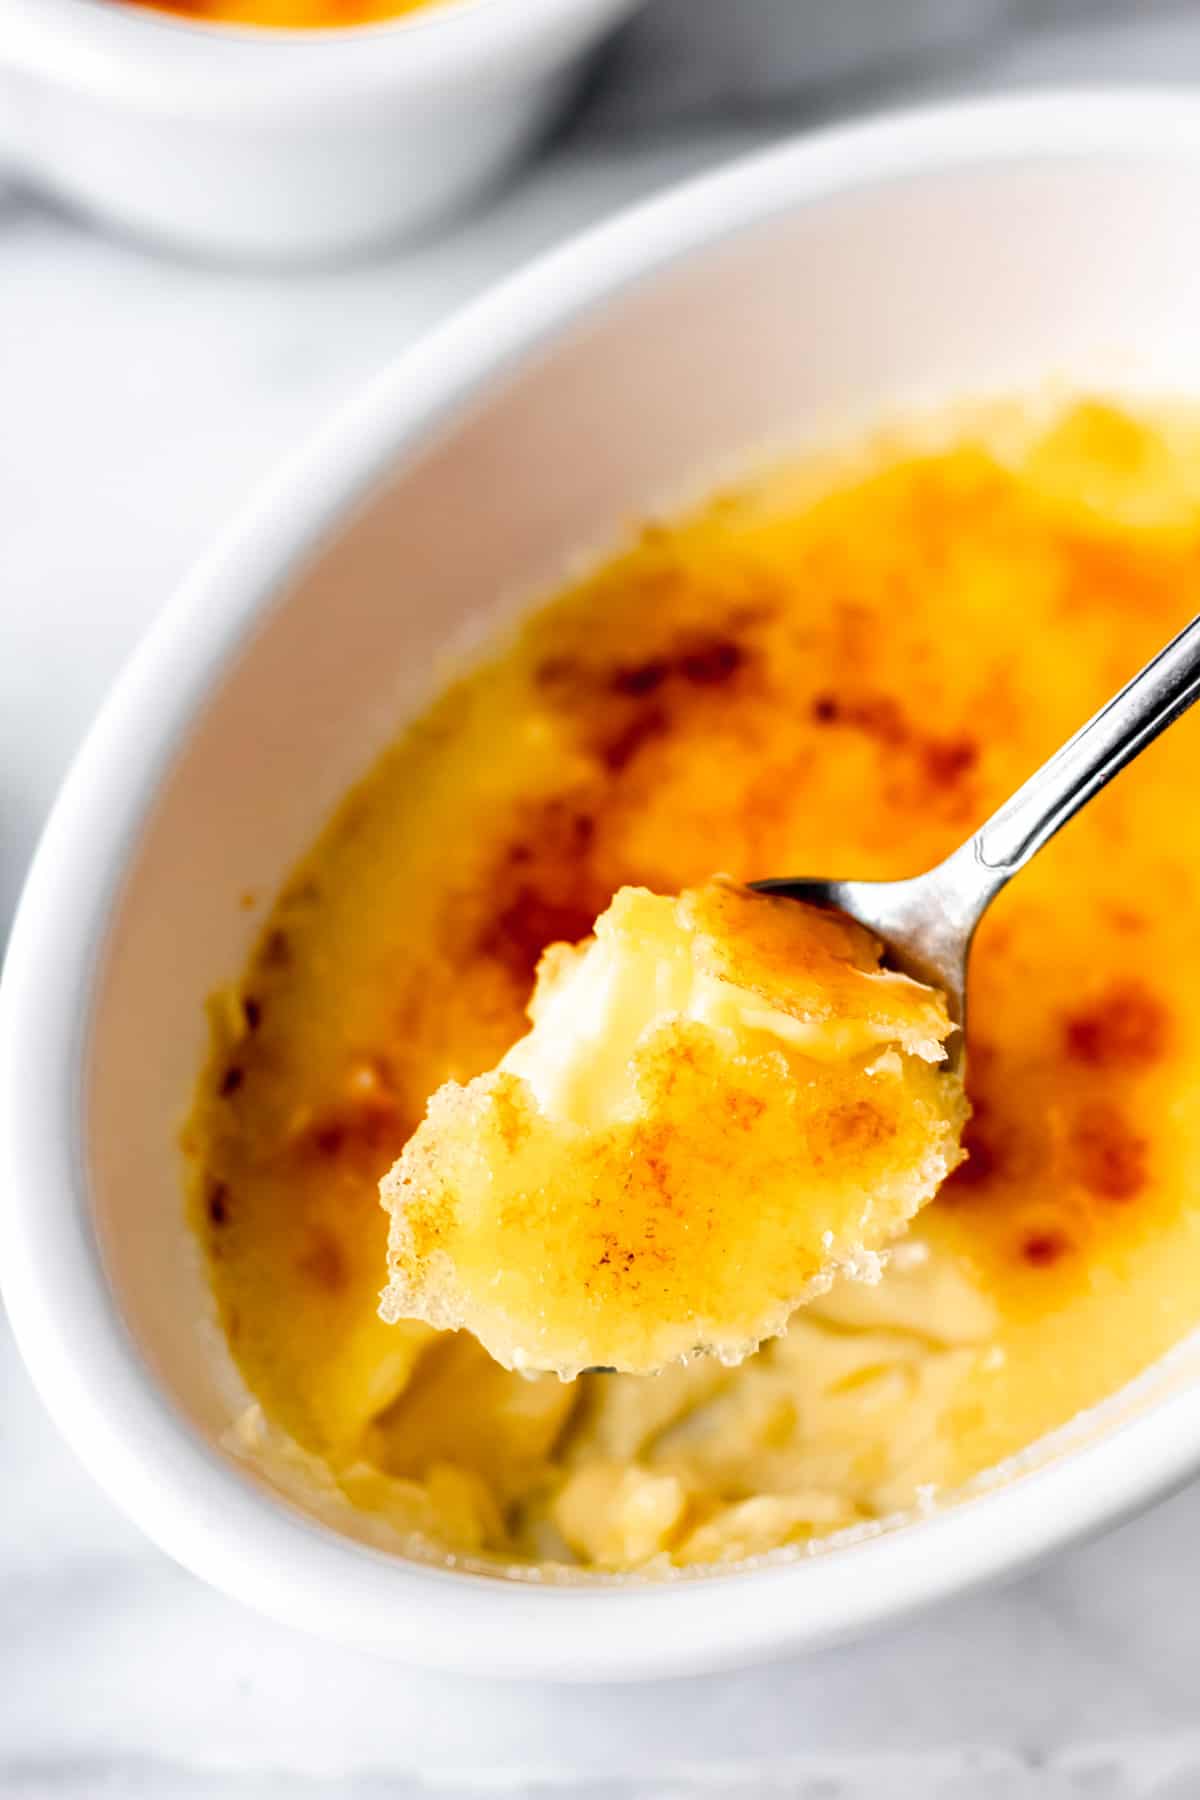 A spoonful of creme brulee being lifted up over the ramekin.